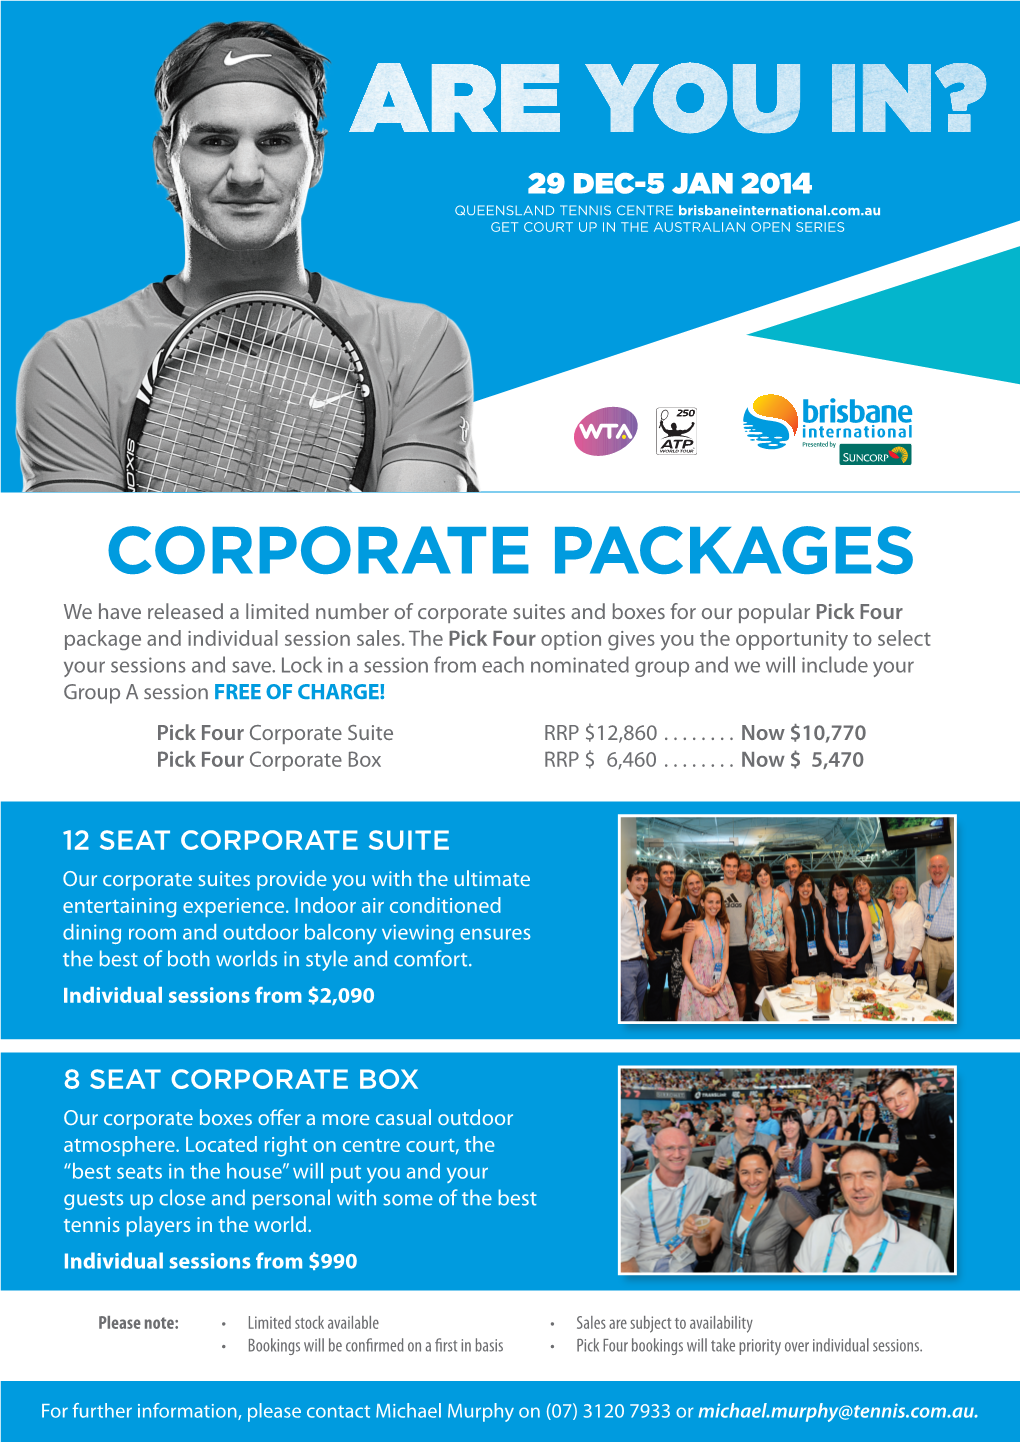 CORPORATE PACKAGES We Have Released a Limited Number of Corporate Suites and Boxes for Our Popular Pick Four Package and Individual Session Sales